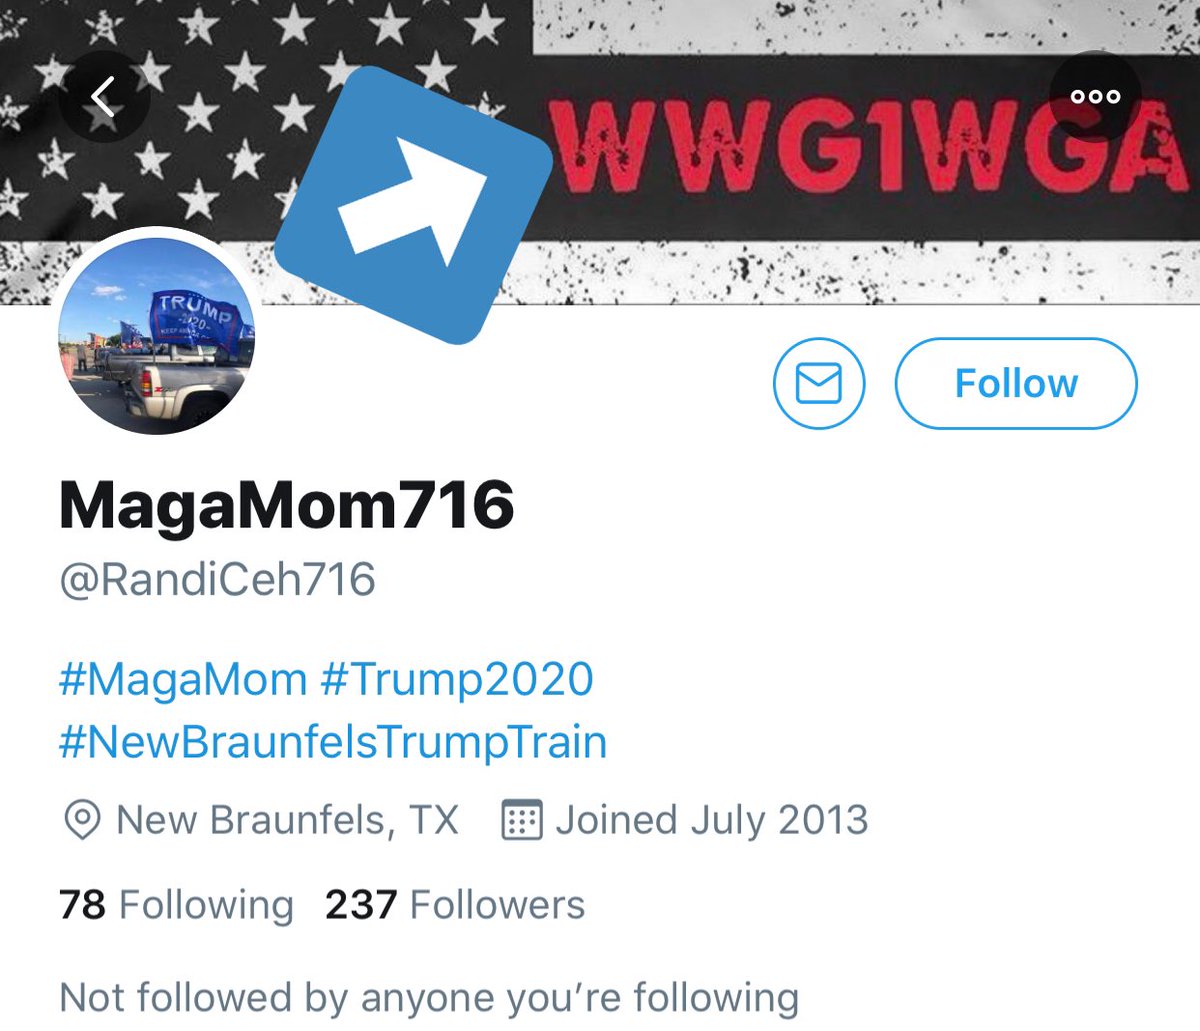 Randi Ceh, one of the leaders of the “New Braunfels Trump Train” thugs is Qanon.